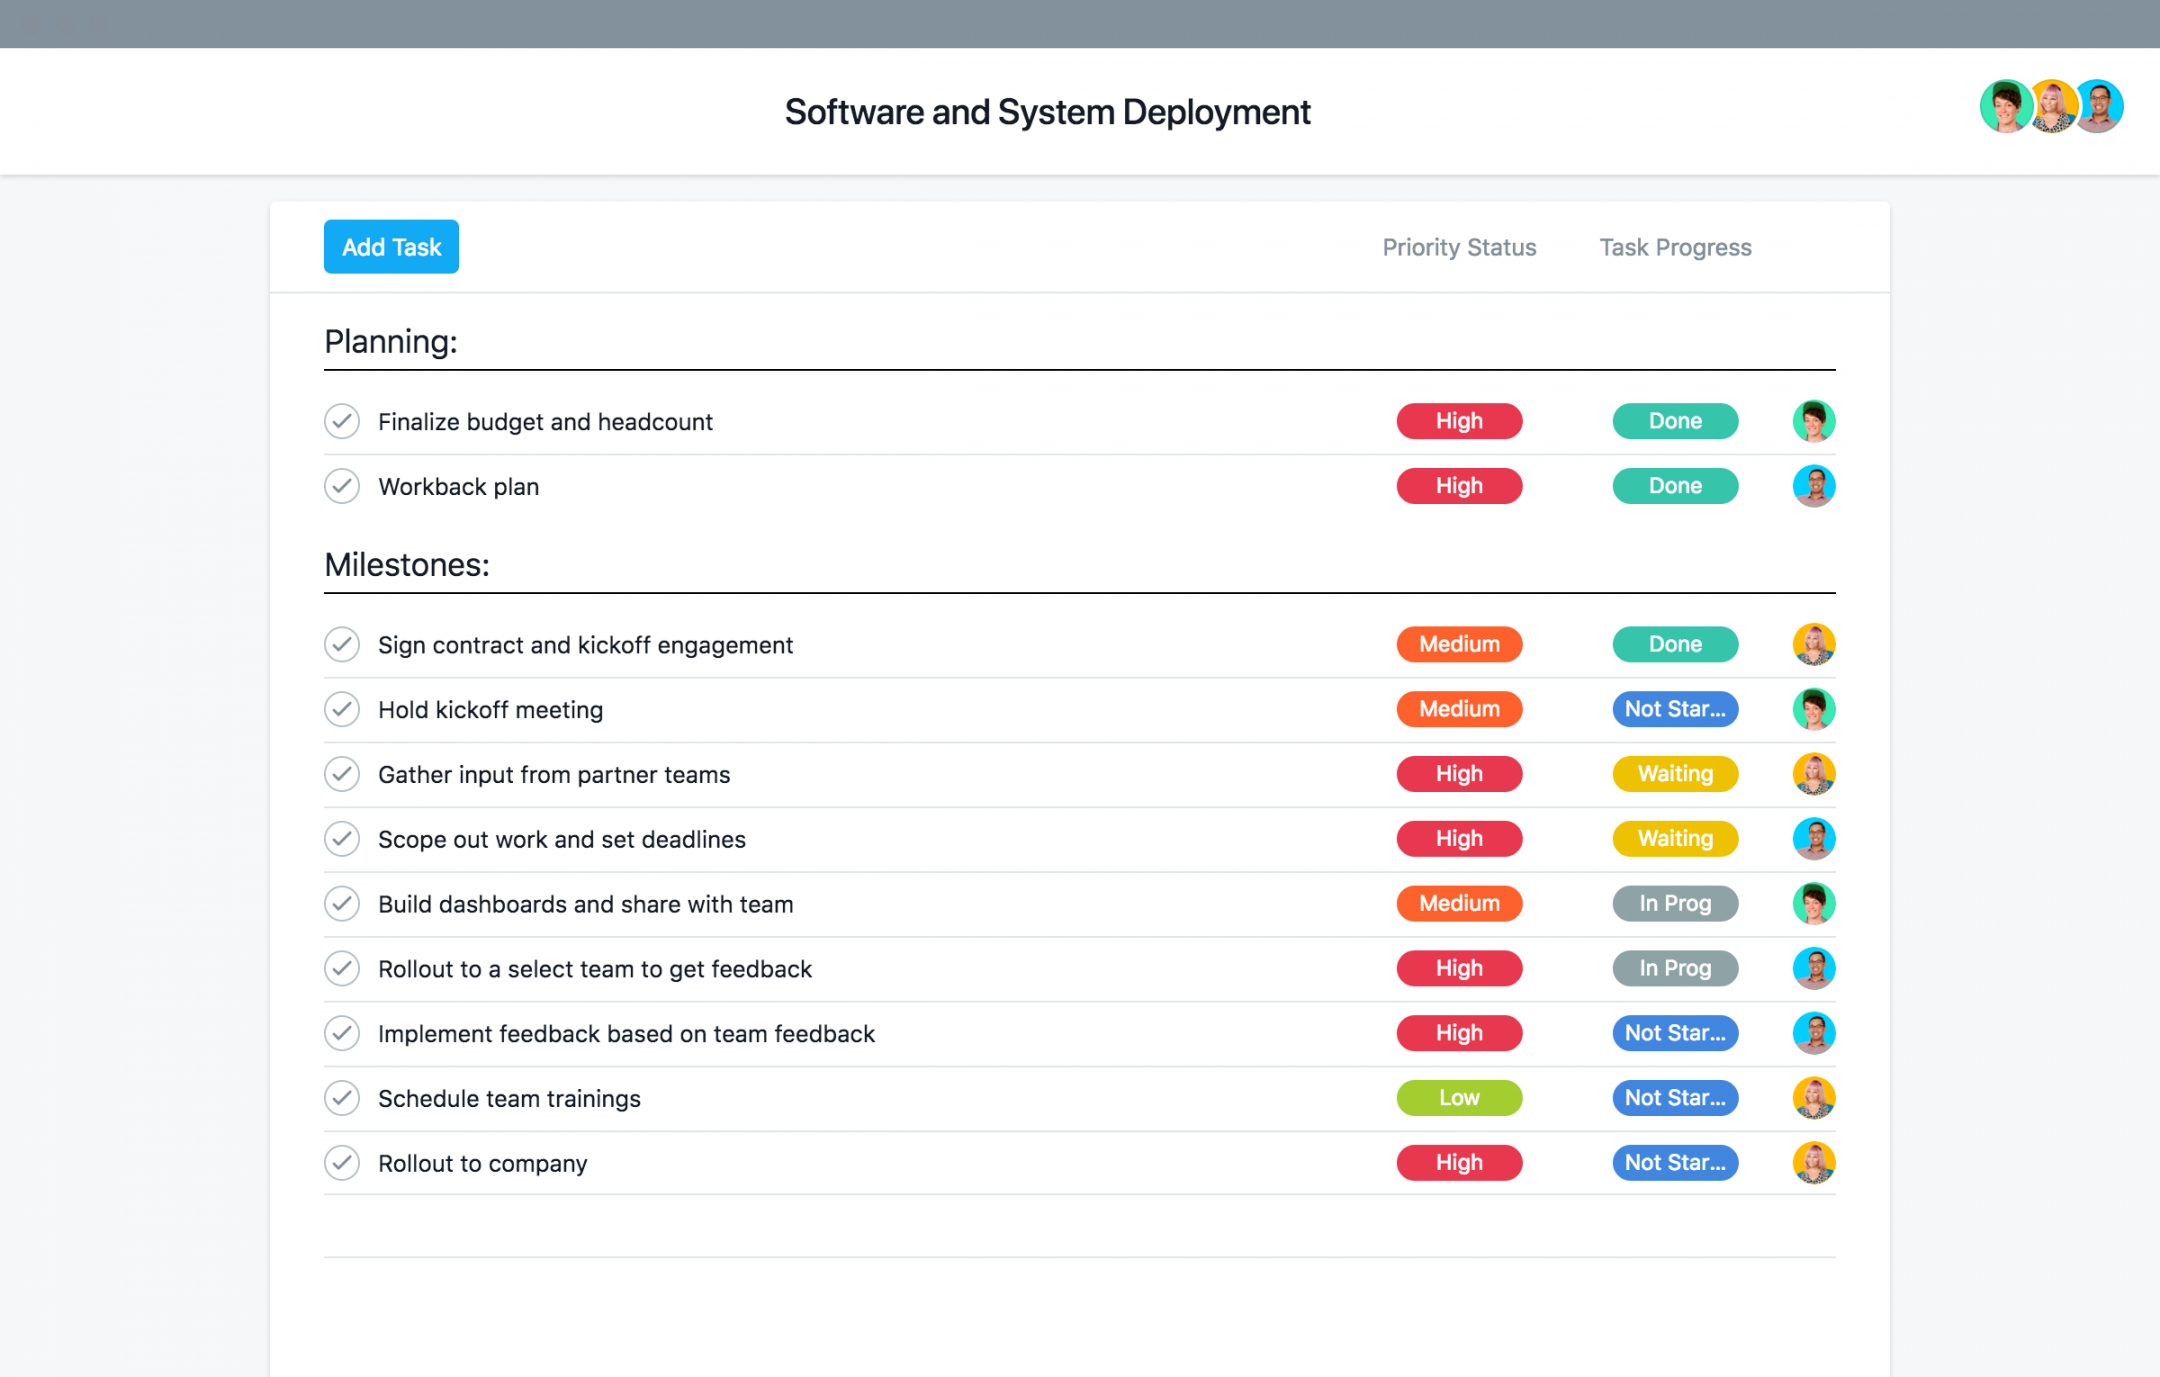 printable software and systems deployment checklist template for it teams · asana software installation checklist template excel